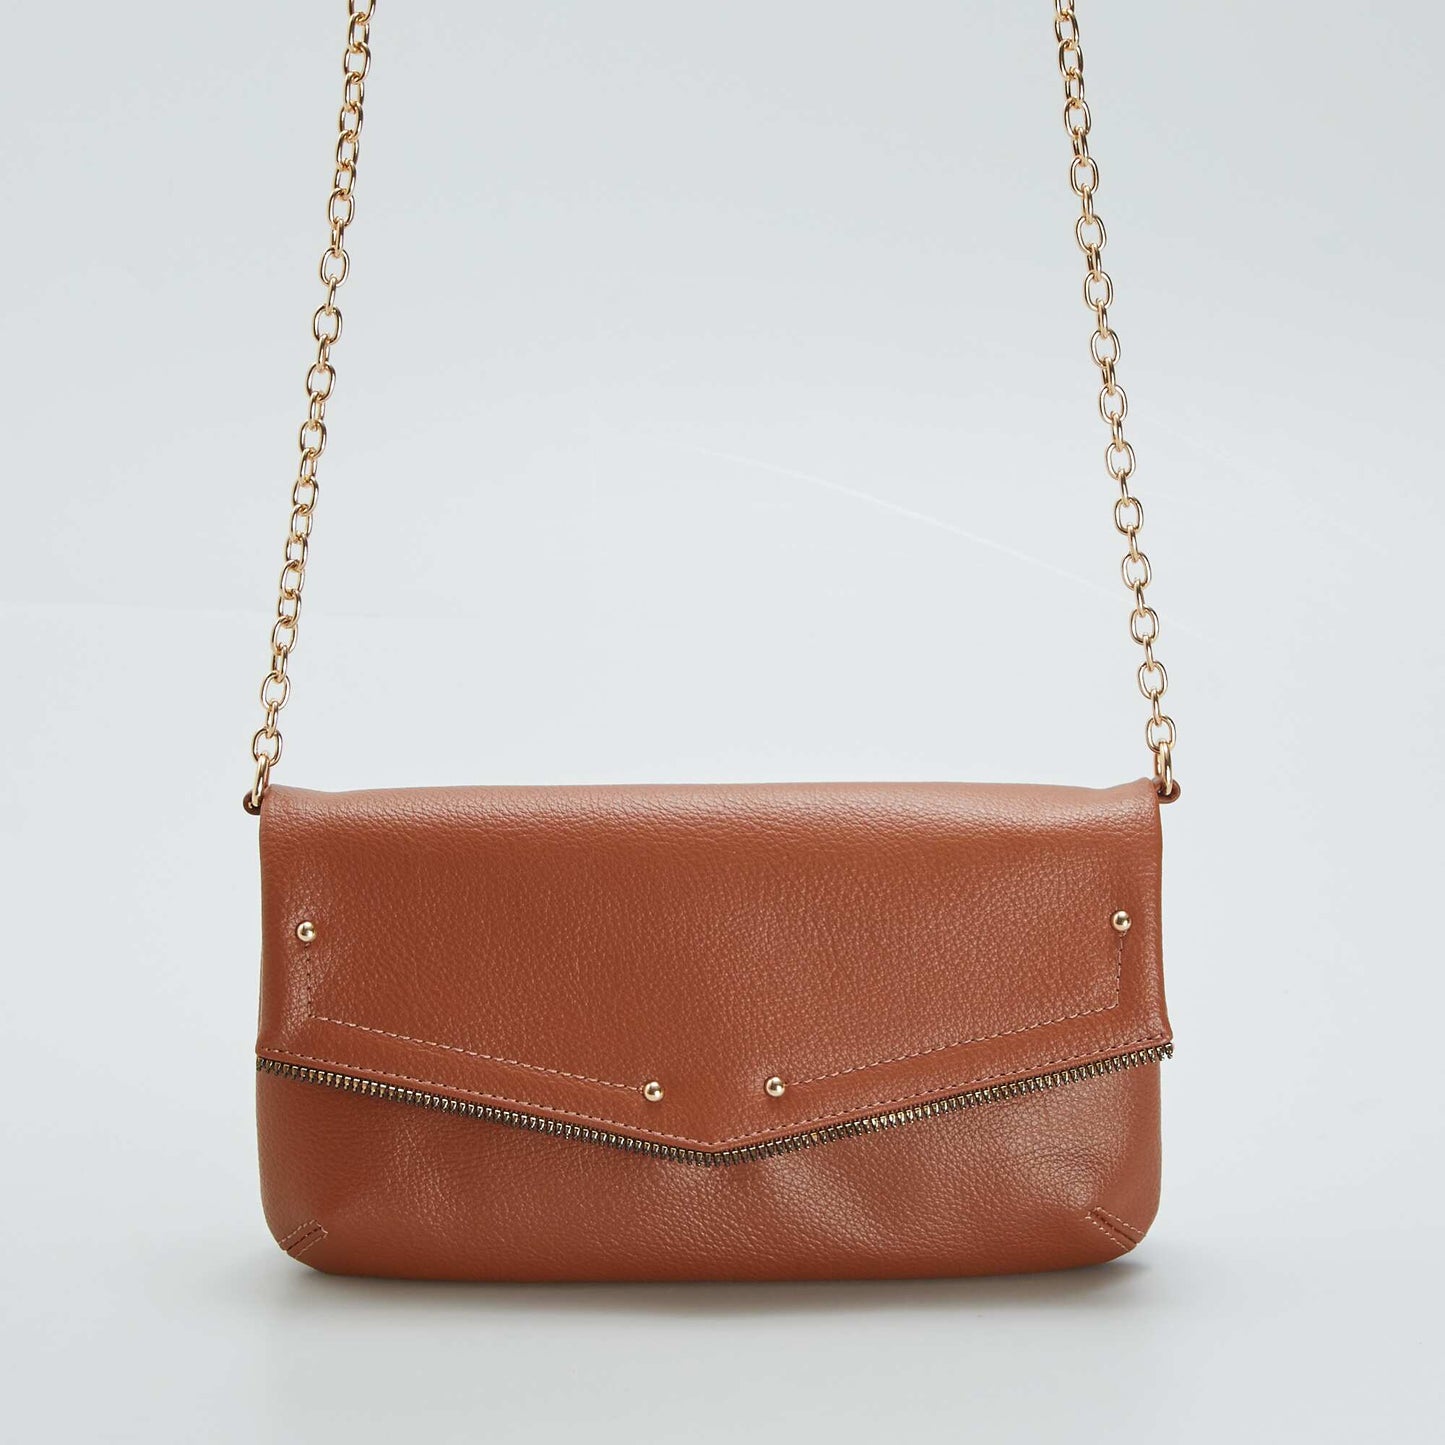 Envelope bag with chain strap BROWN